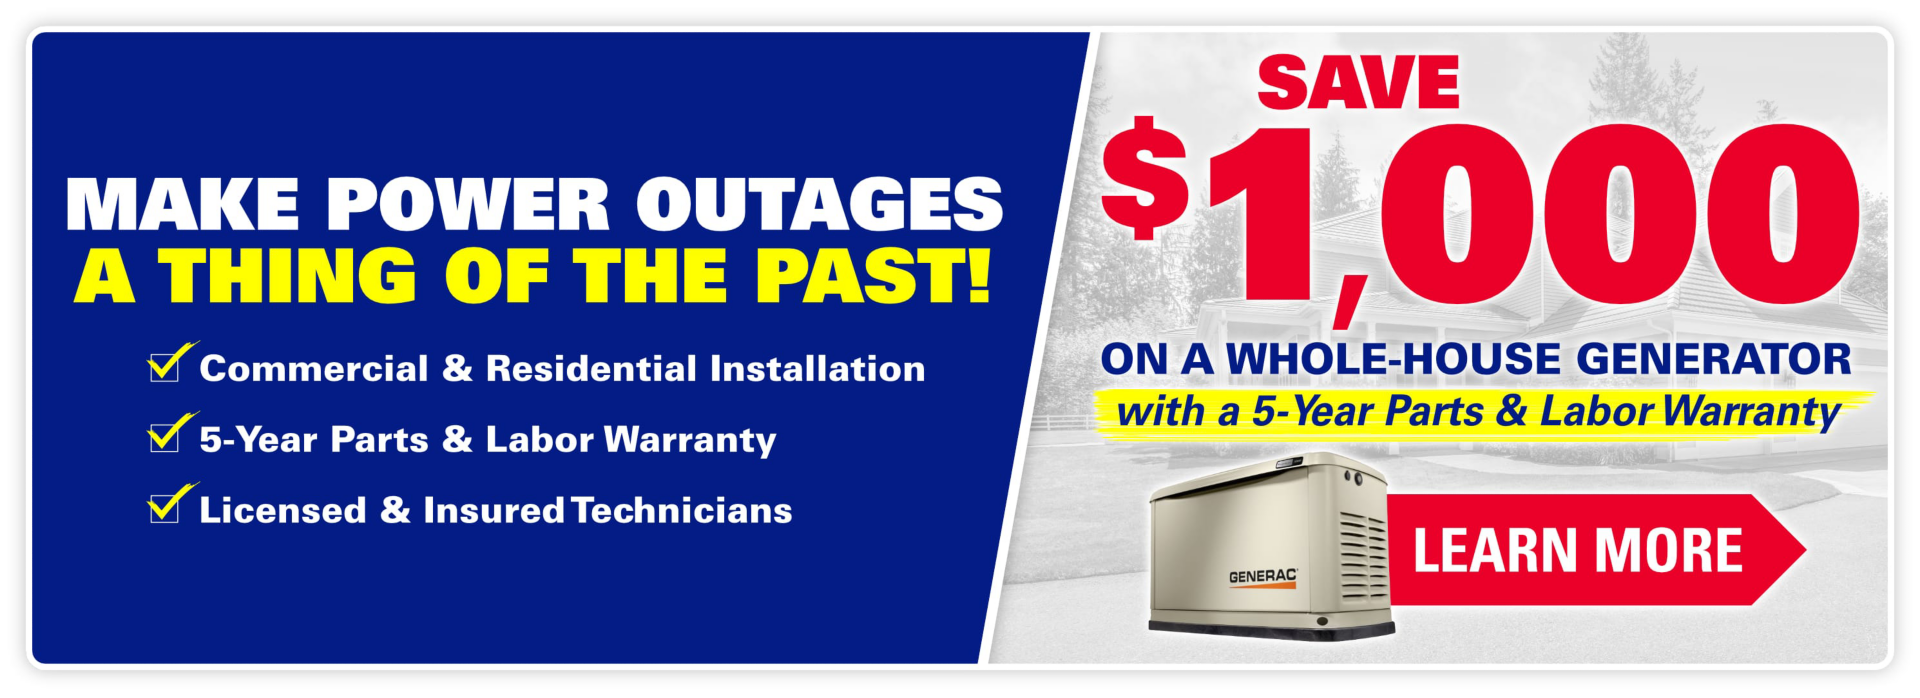 Save $1,000 on a Whole-Home Backup Generator